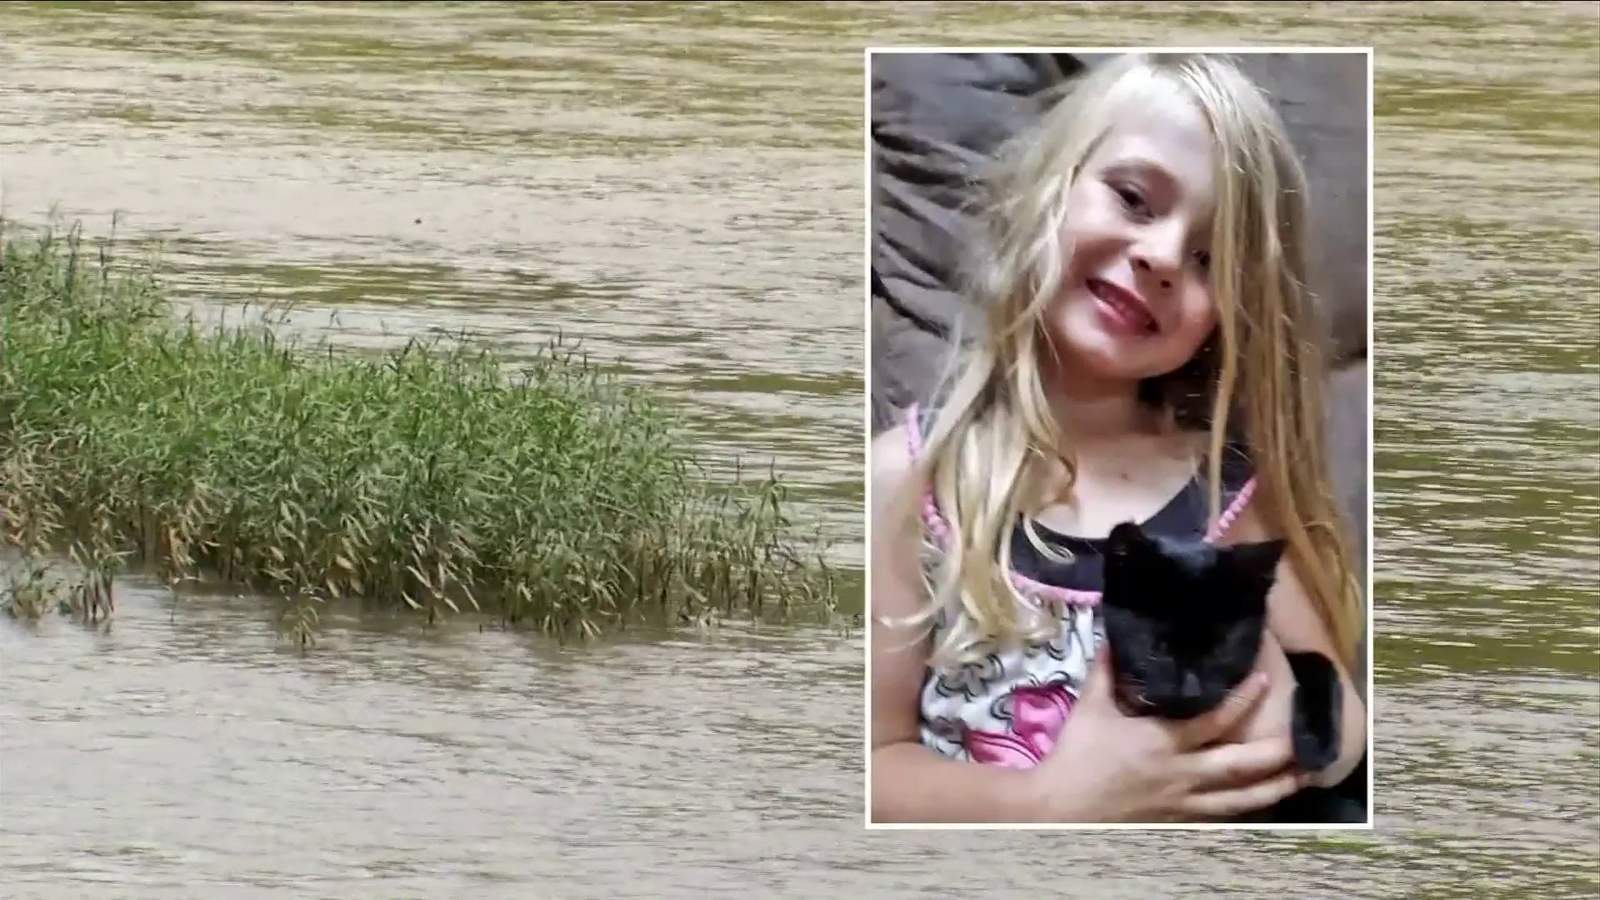 Two indicted after 3-year-old drowned in New River while they were high on meth, authorities say